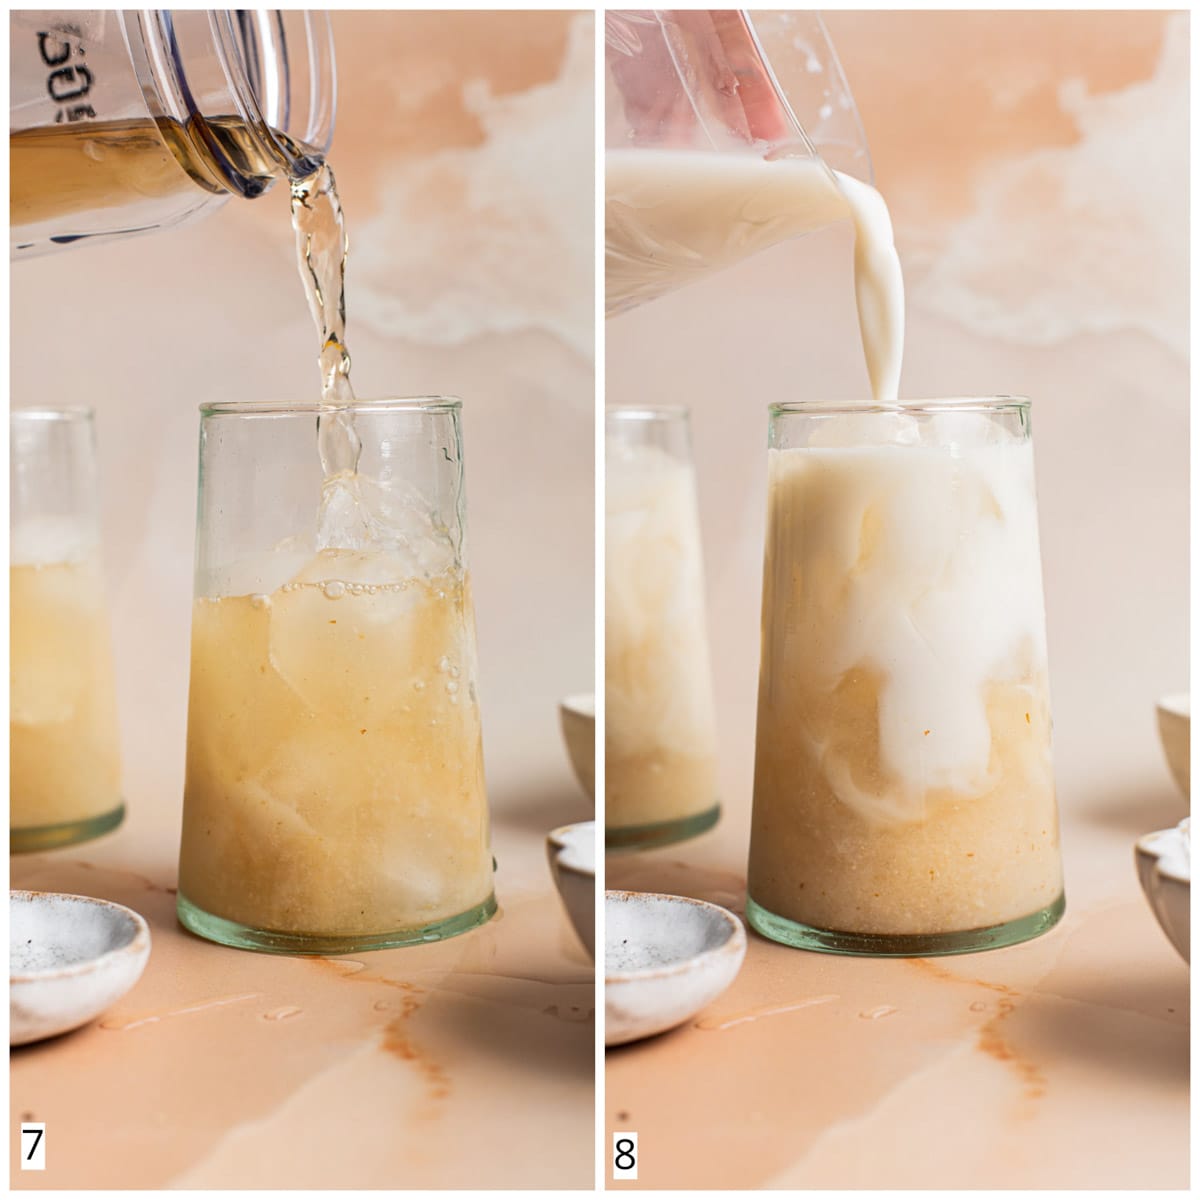 A collage of two images showing a tea and milk being poured into a glass.